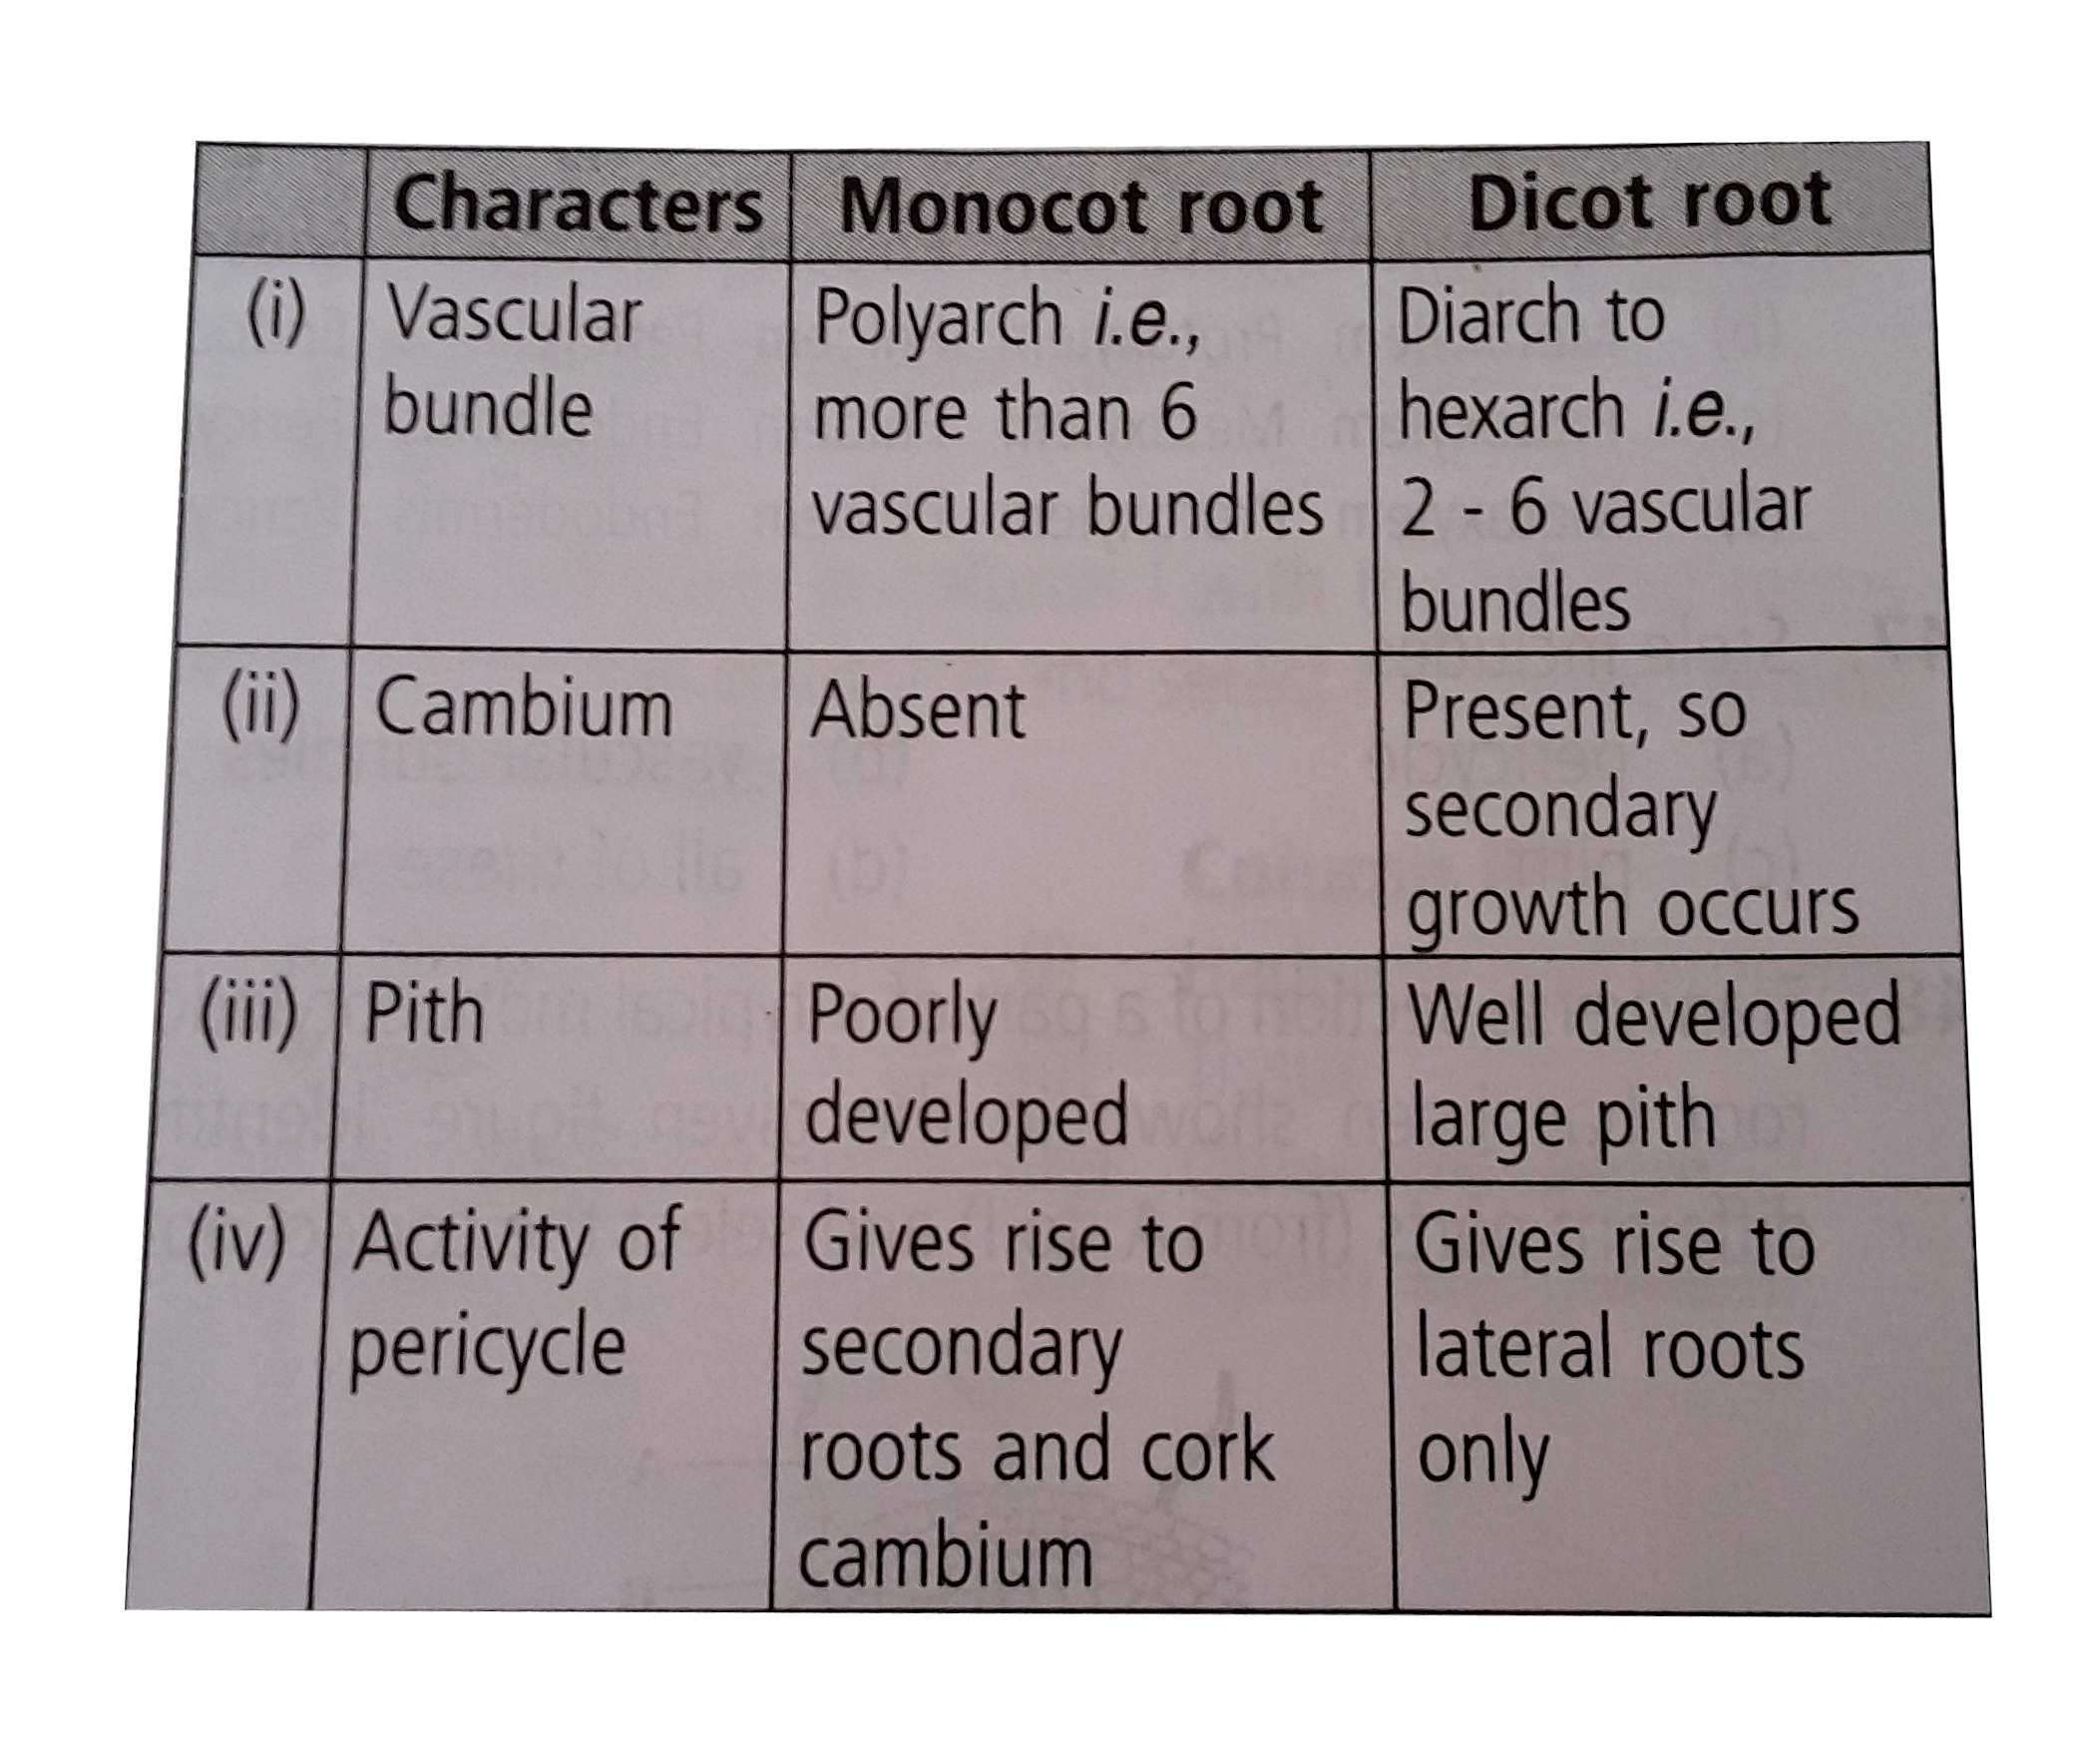 Following table summarises the differences between a monocot root and a dicot root. Identify the incorrect differences and select the correct option